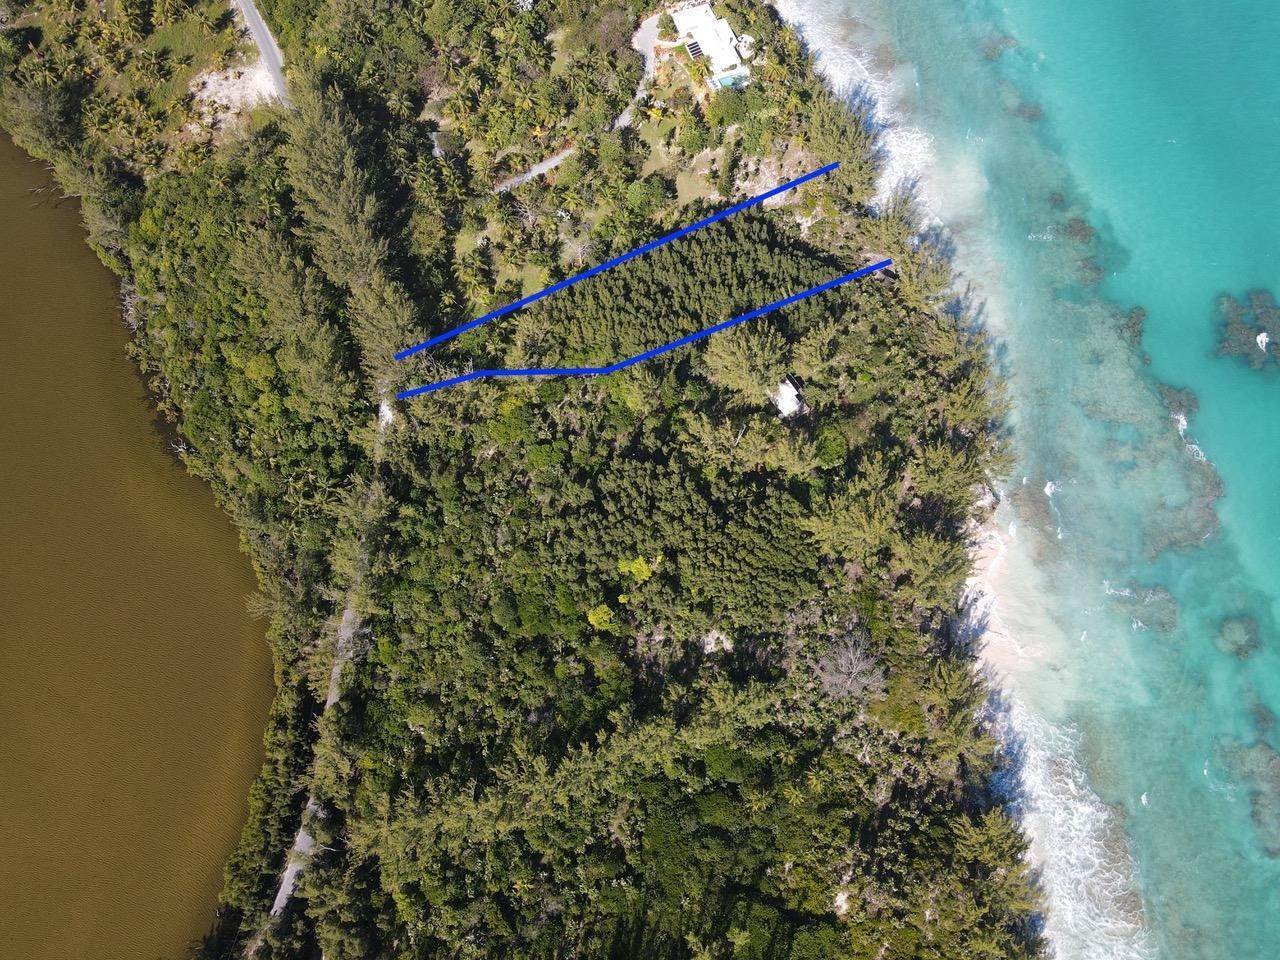 11. Lots / Acreage for Sale at Banks Road, Governors Harbour, Eleuthera, Bahamas